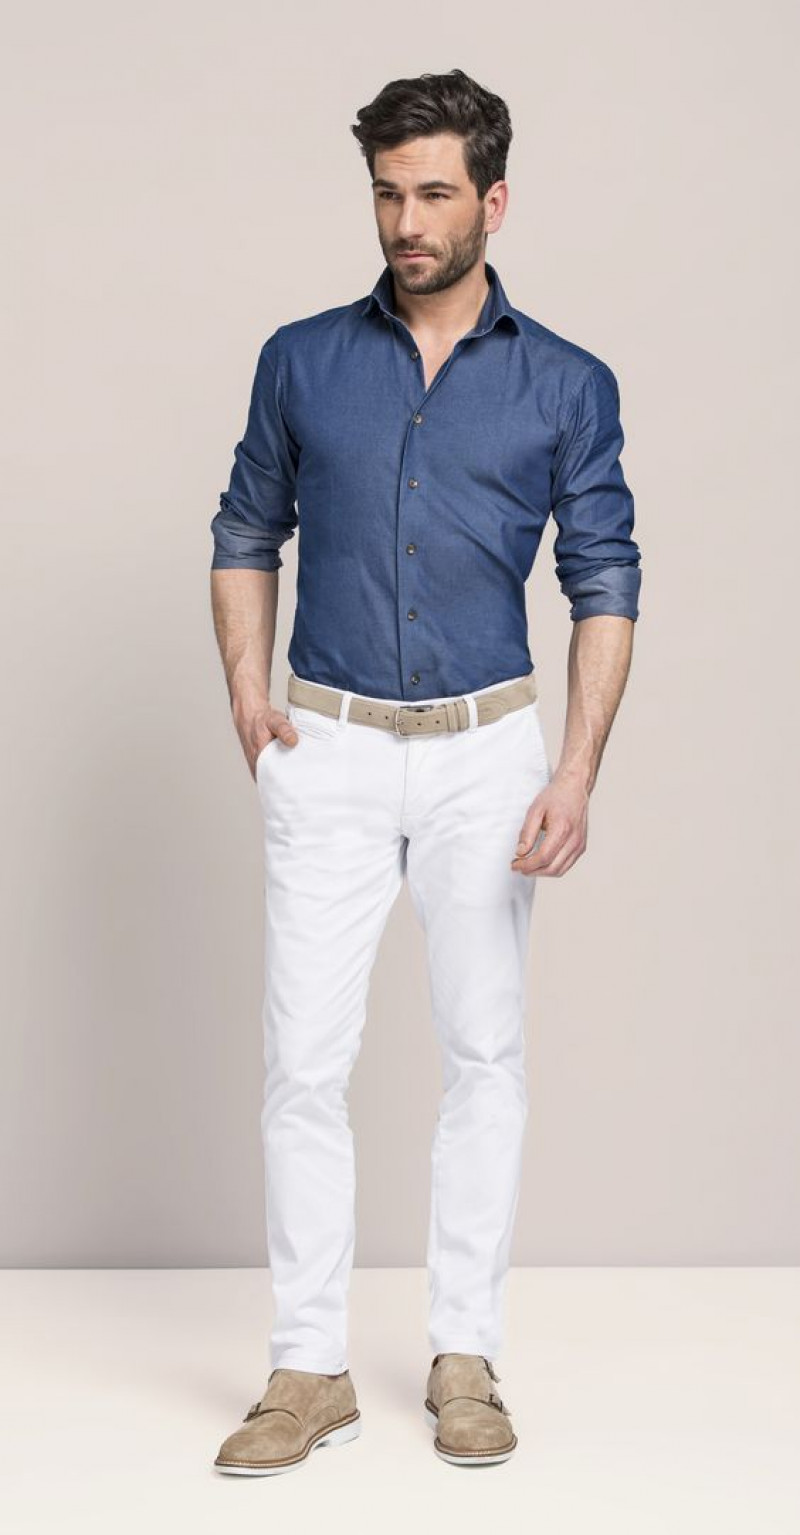 dark blue shirt and snowy white trousers